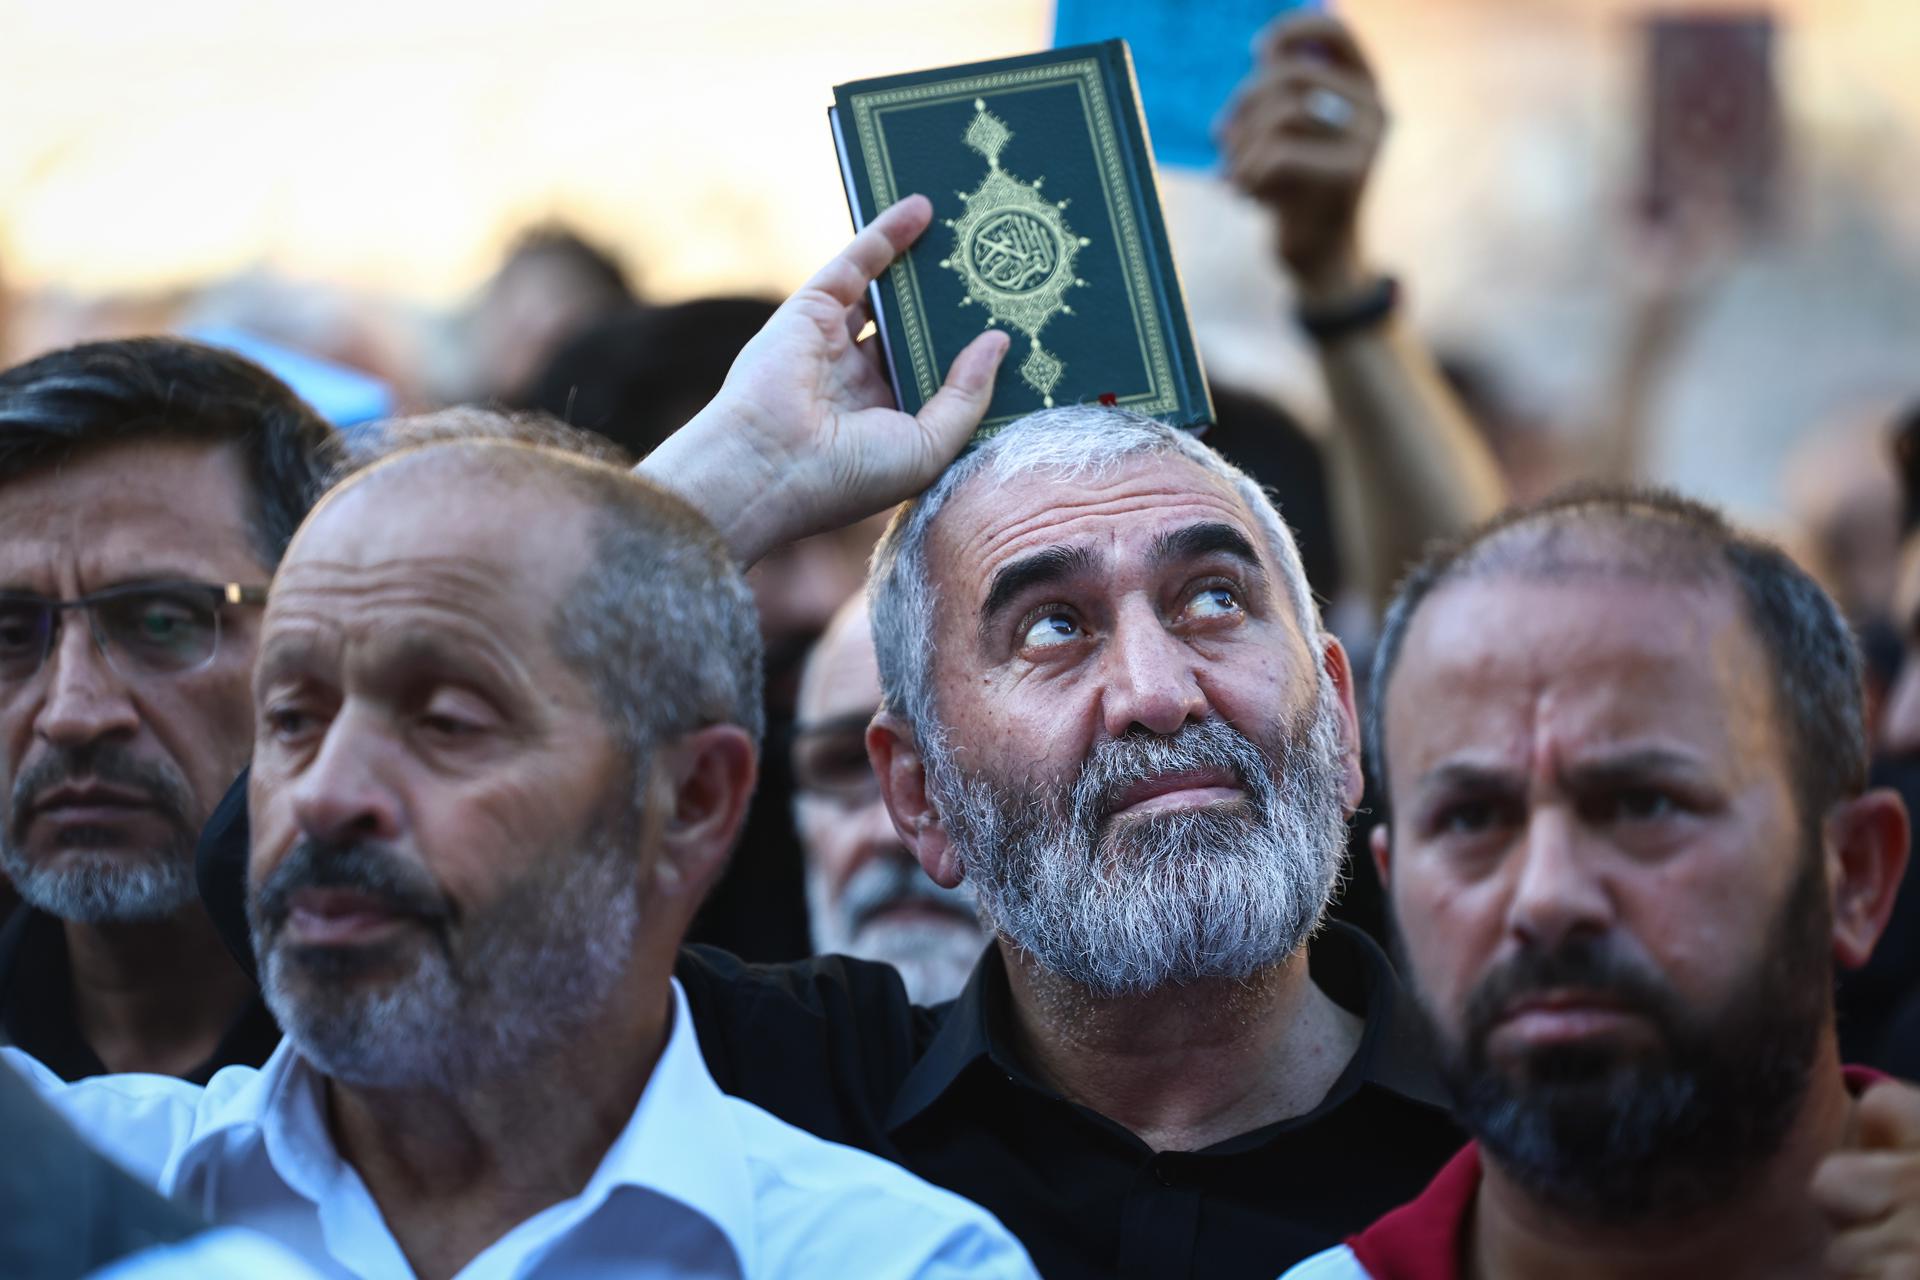 A protester holds a copy of the Koran as they attend a protest against Sweden in front of the Consulate General of Sweden in Istanbul, Turkey, 30 July 2023. EFE/EPA/FILE/SEDAT SUNA